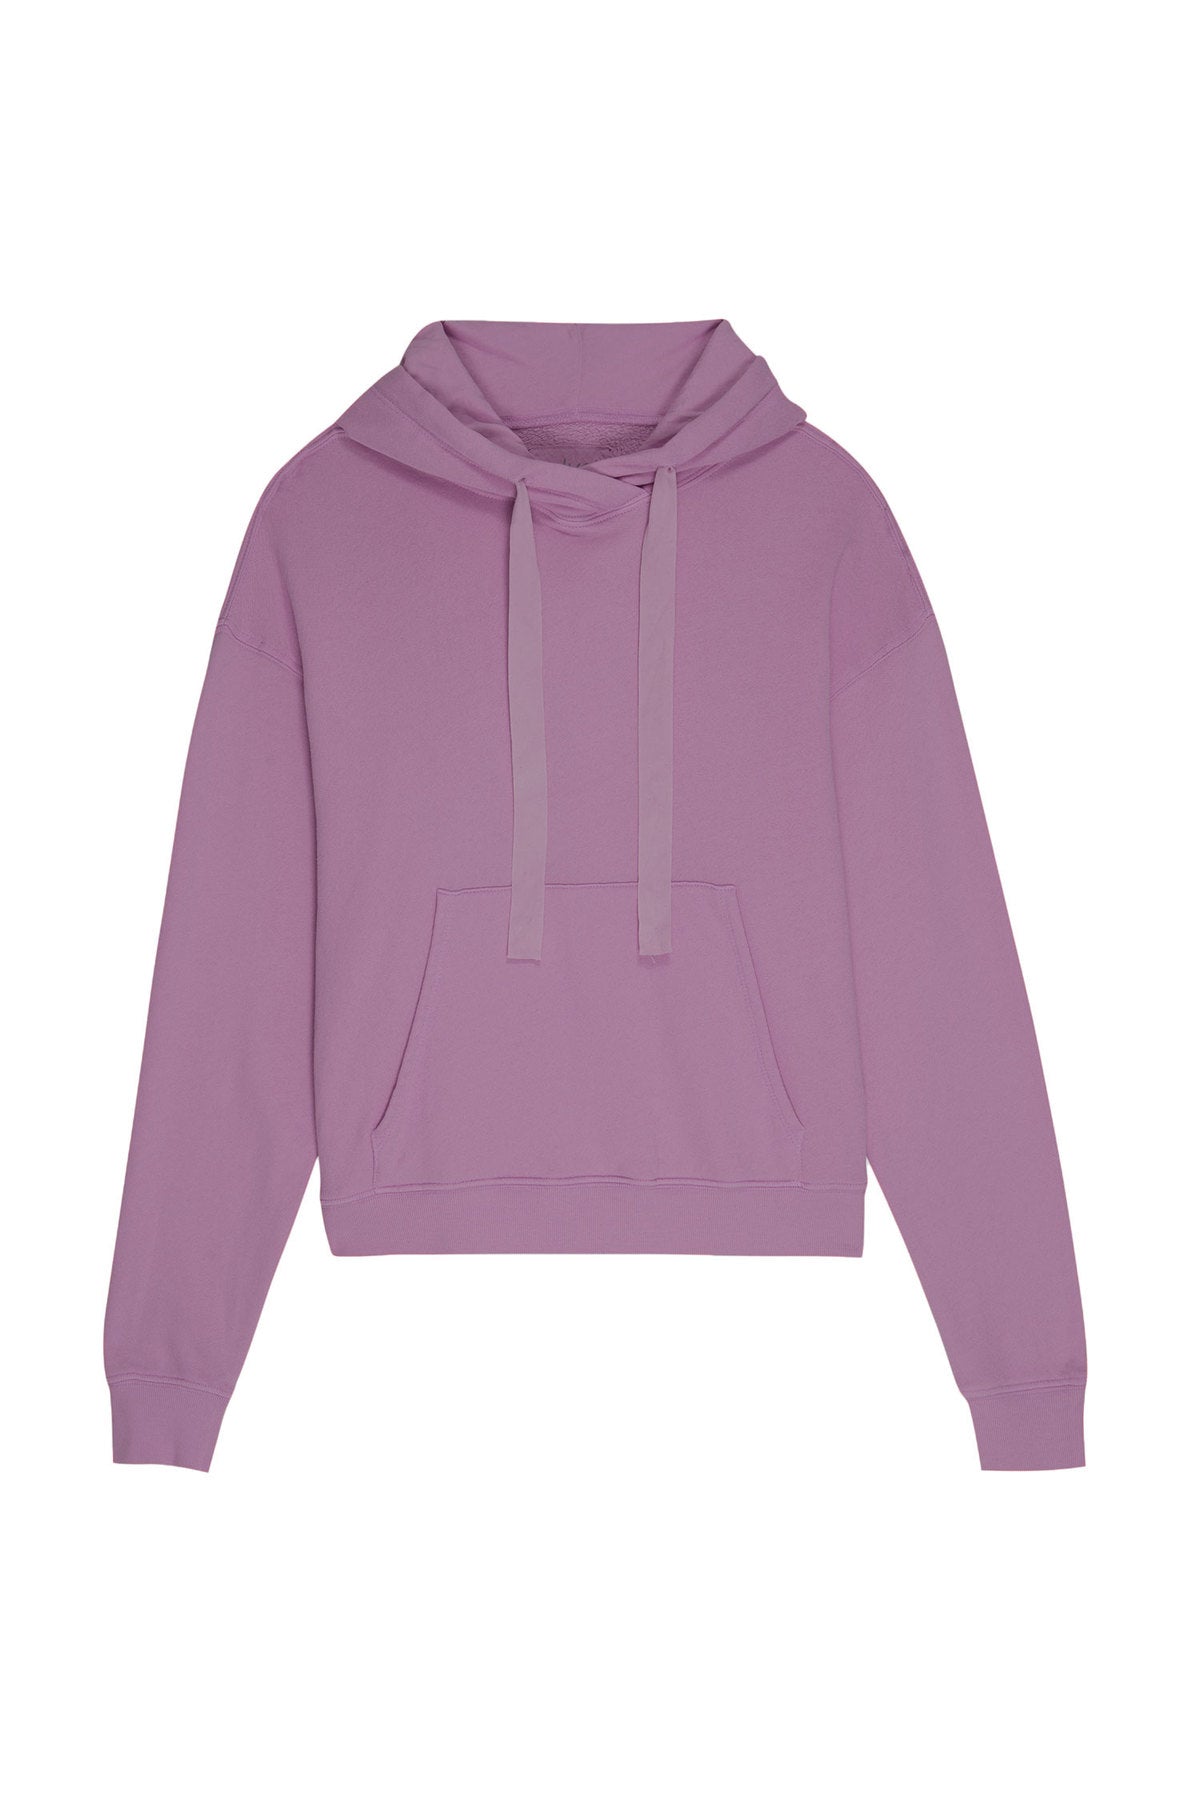 An OJAI HOODIE from Velvet by Jenny Graham, in a stylish shade of purple and featuring a comfortable hood.-35783045578945